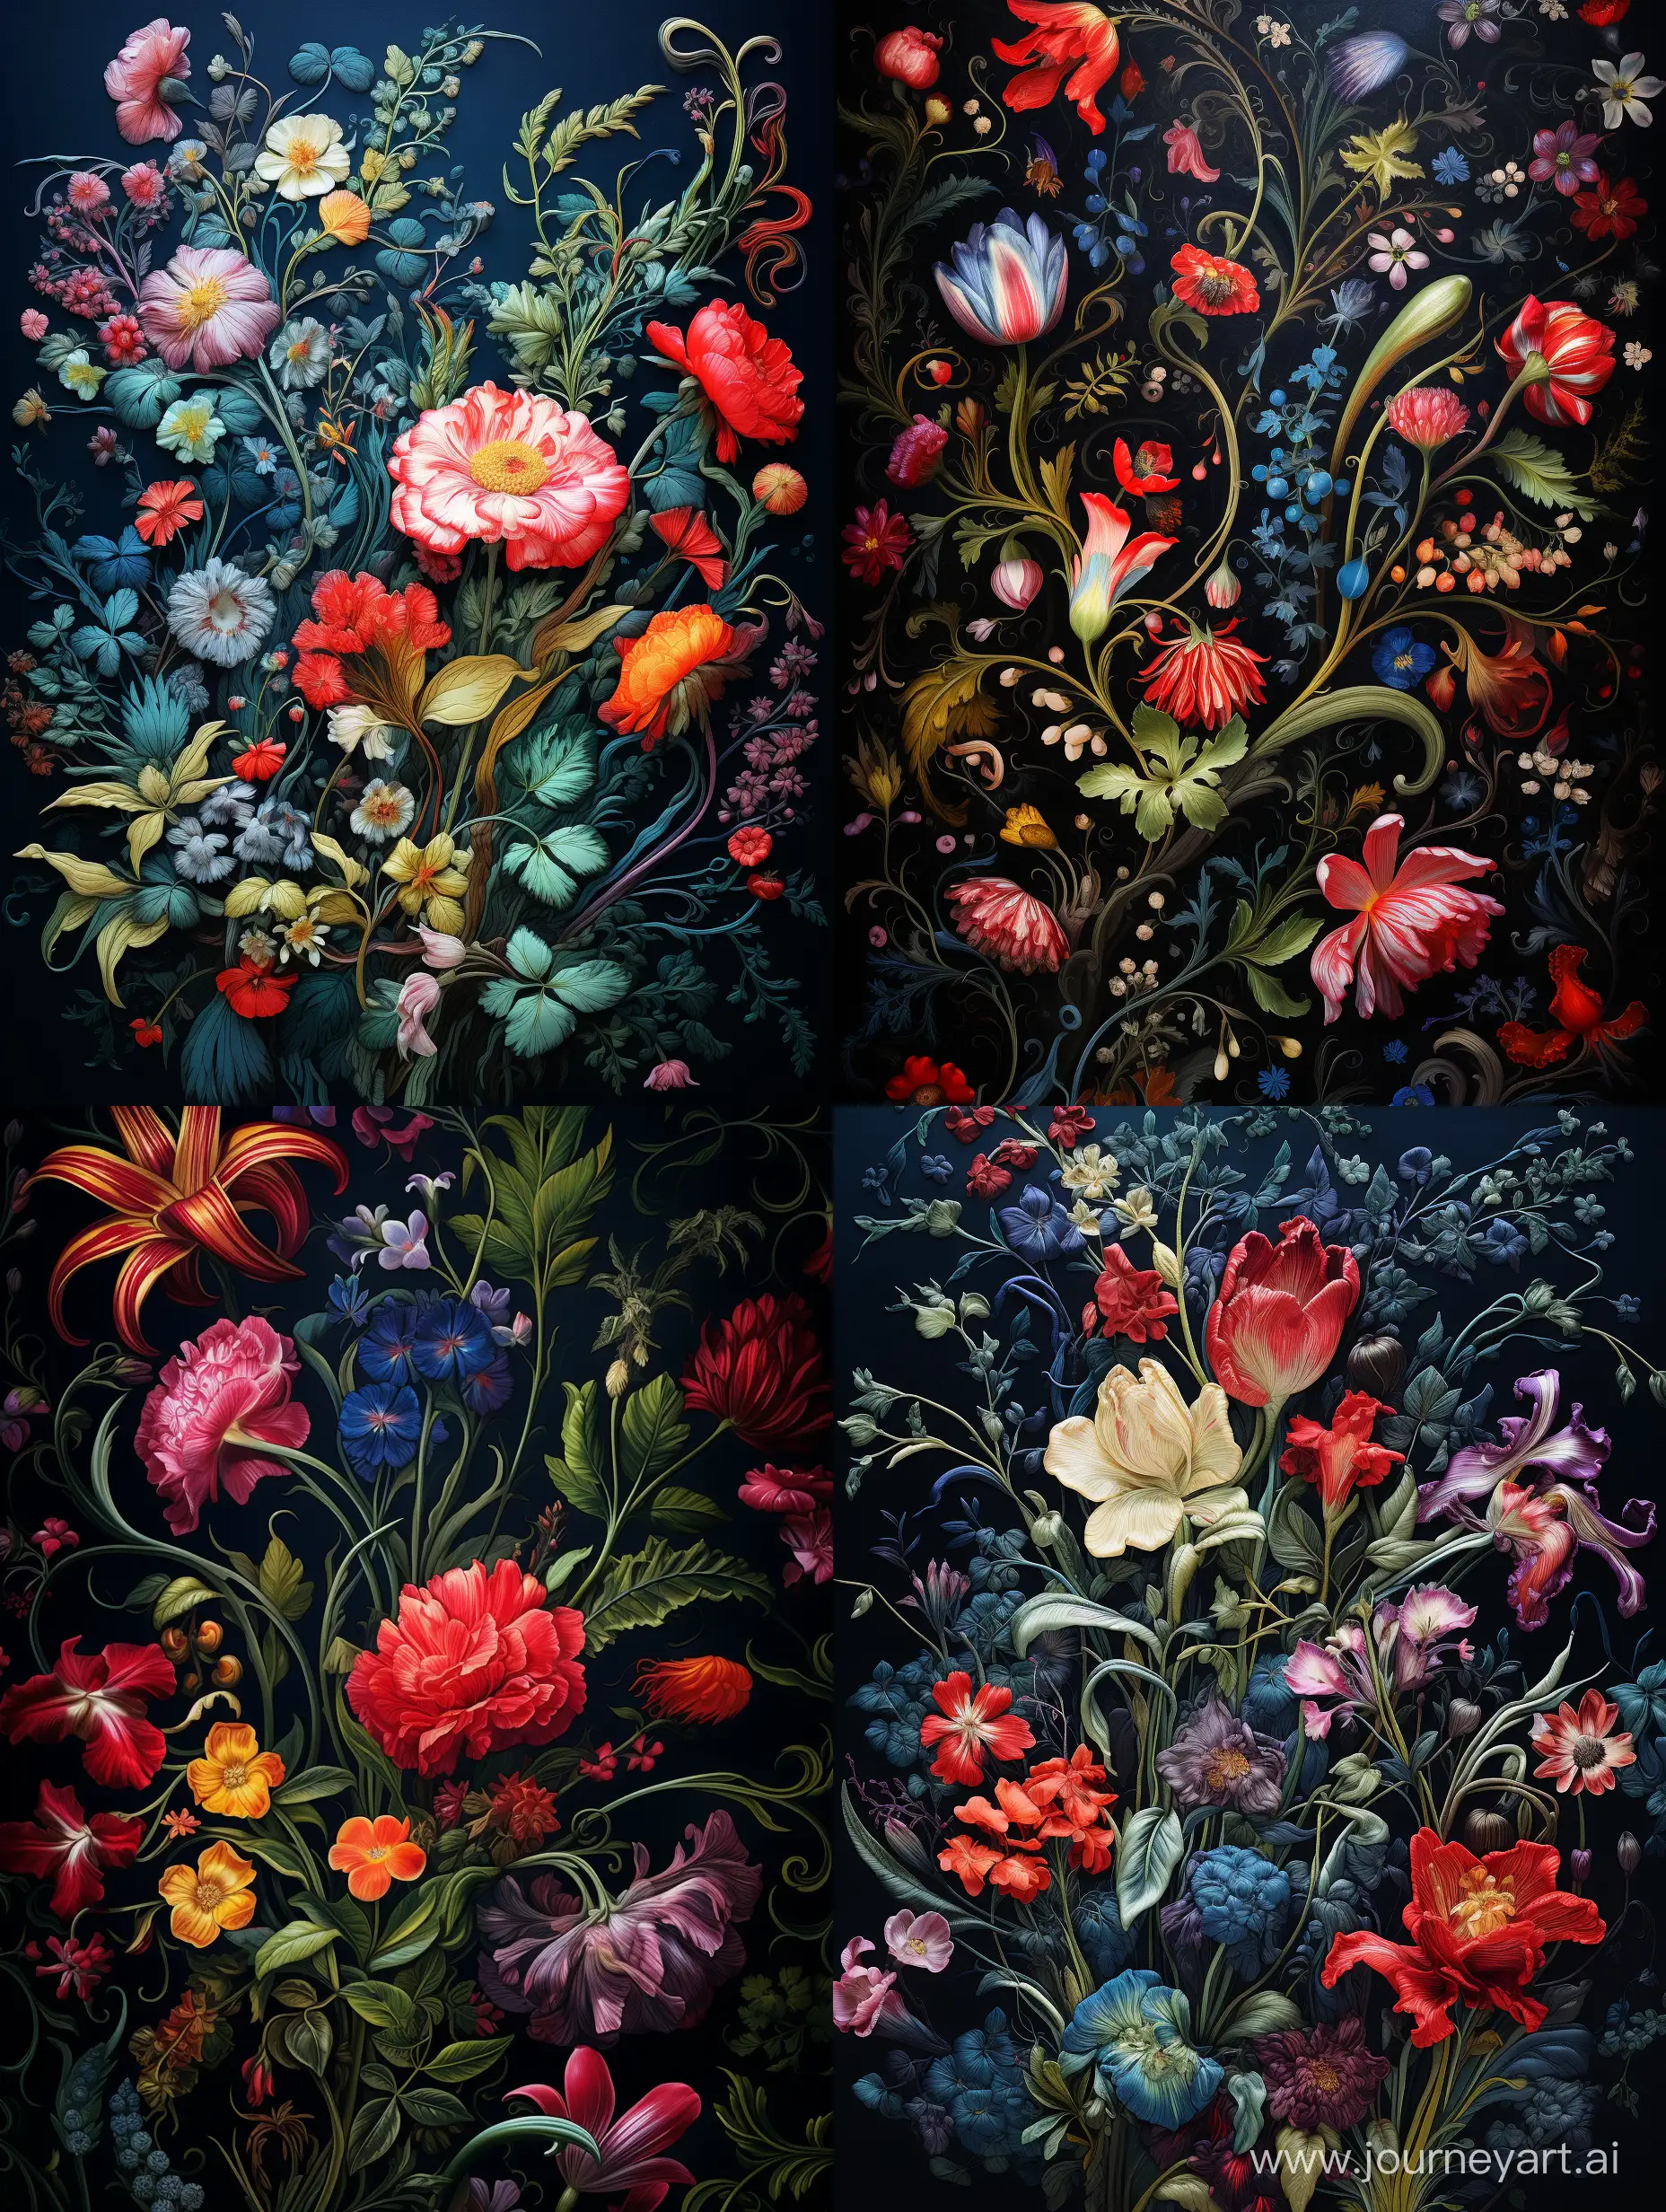 Baroque-RoccocoInspired-Floating-Flowers-Painting-with-Vibrant-Colors-and-Ornate-Embroidery